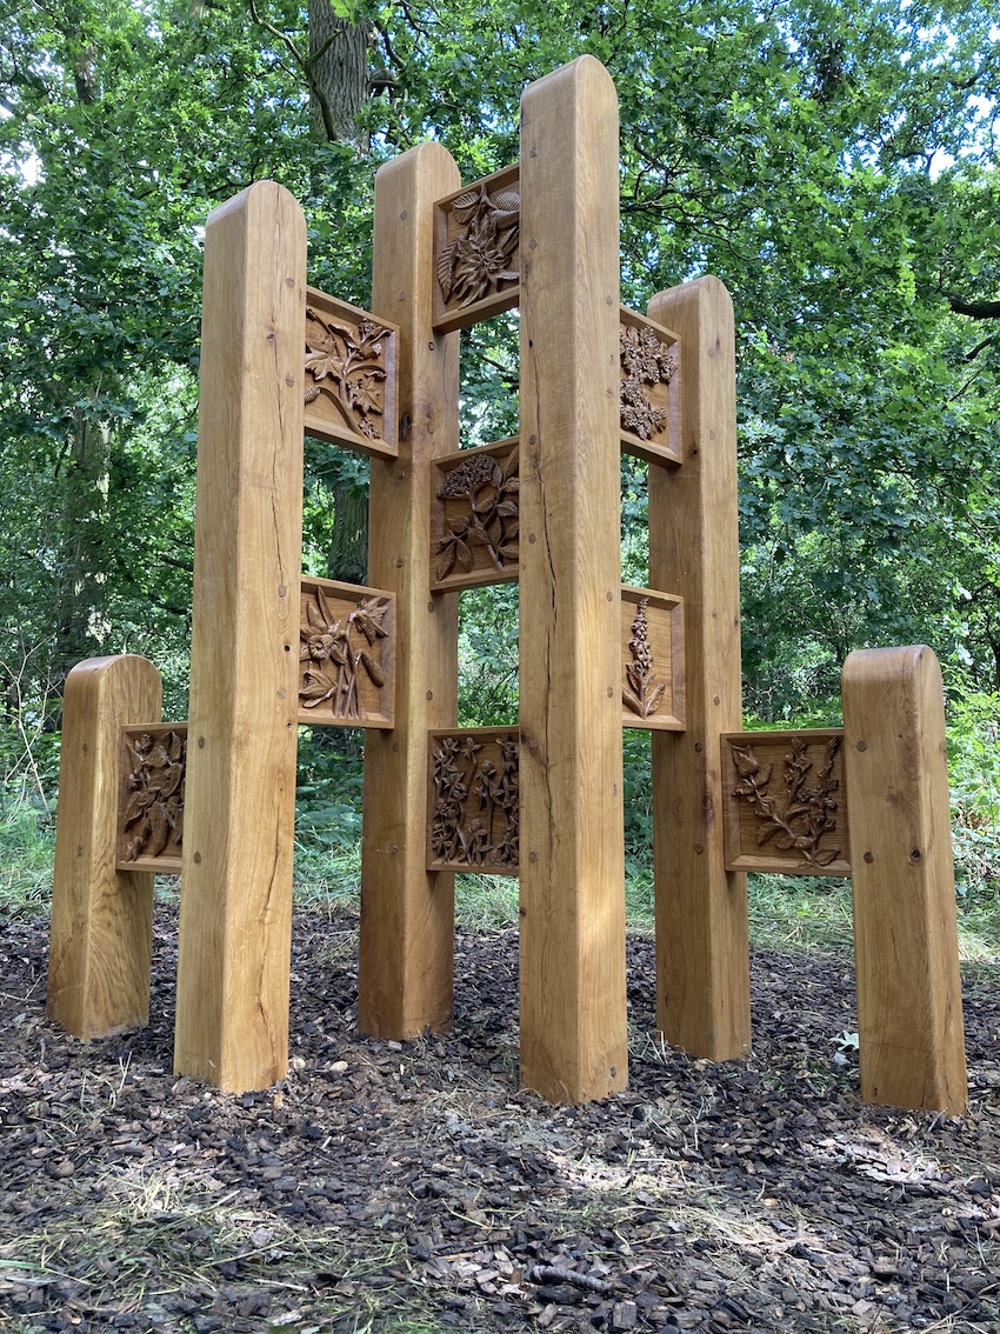 Large oak sculpture featuring tall posts and carved square panels featuring reliefs of flowers and other flora